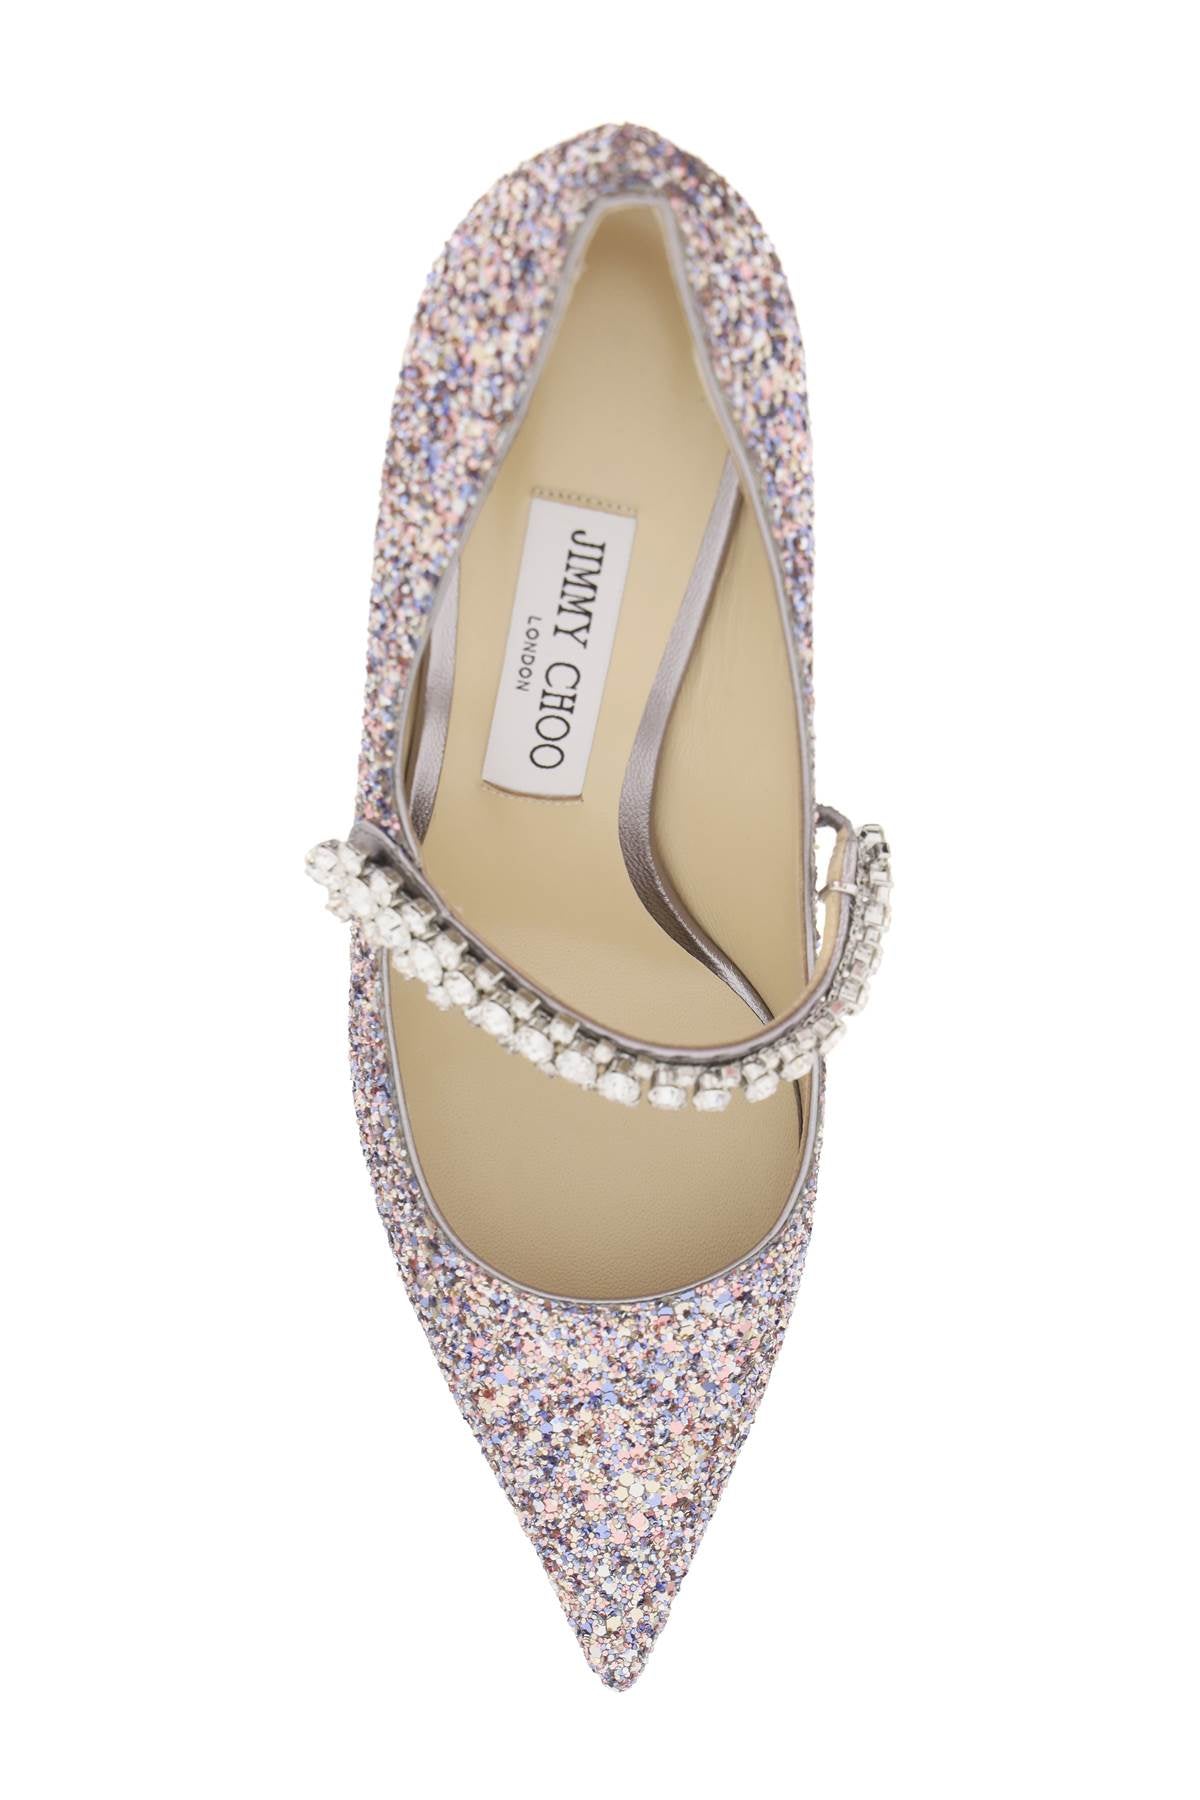 Jimmy choo bing 65 pumps with glitter and crystals-1